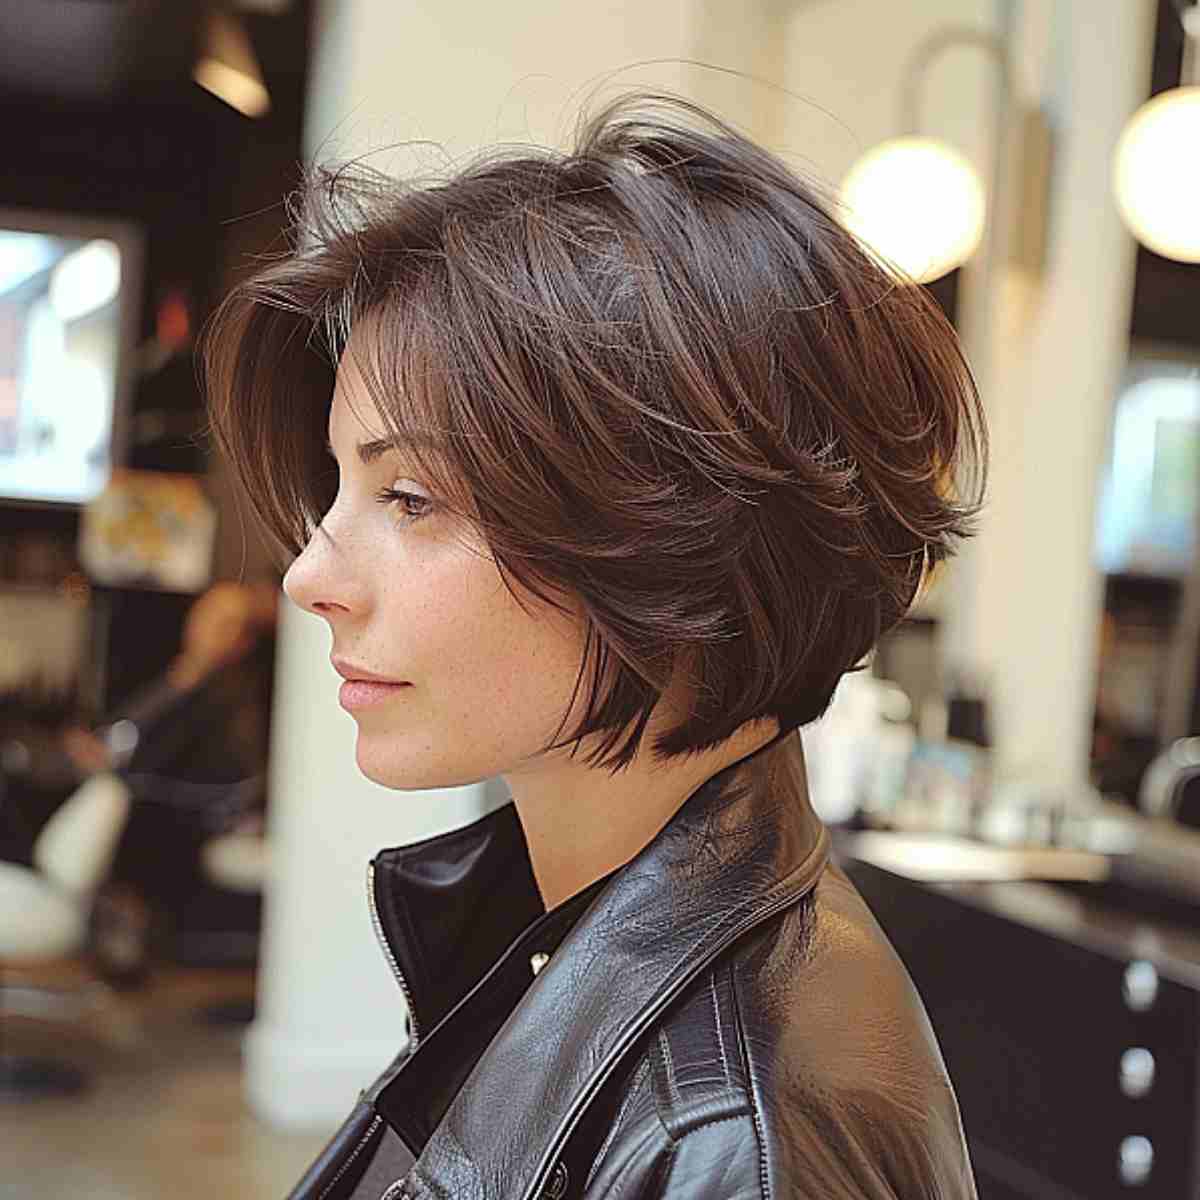 Short pixie bob with top layers